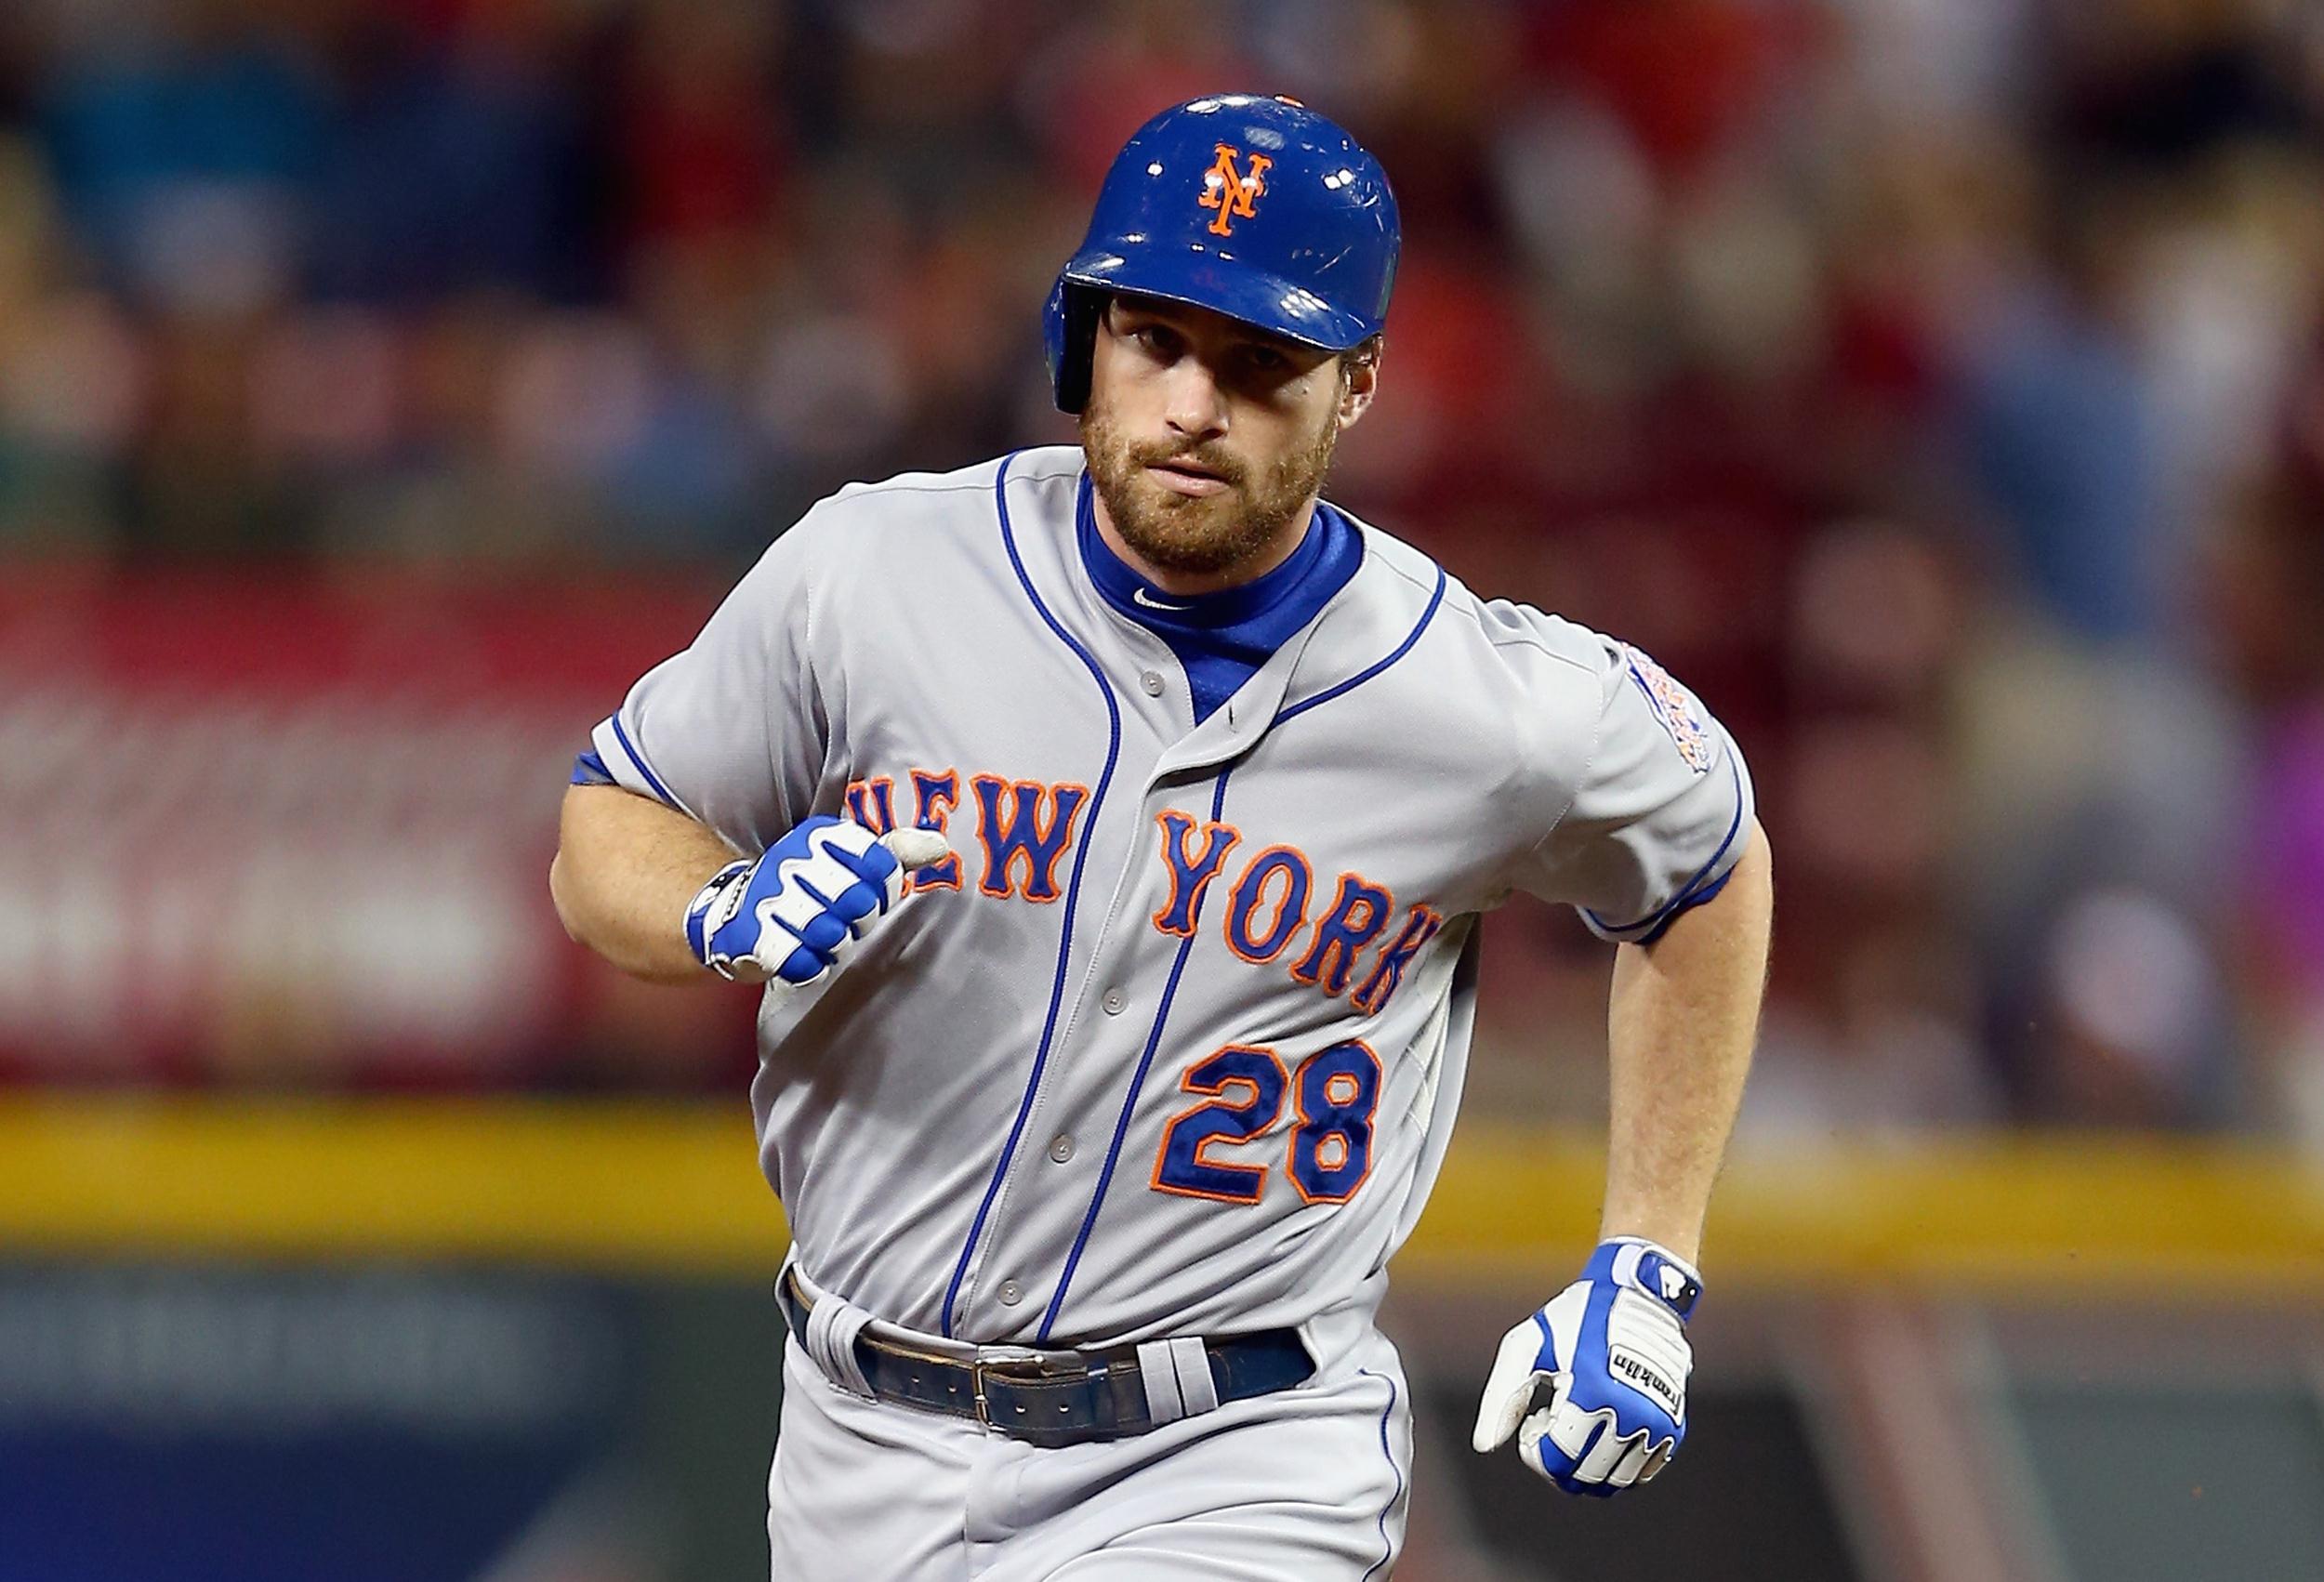 Mets player criticized for paternity leave: It was 'best thing for